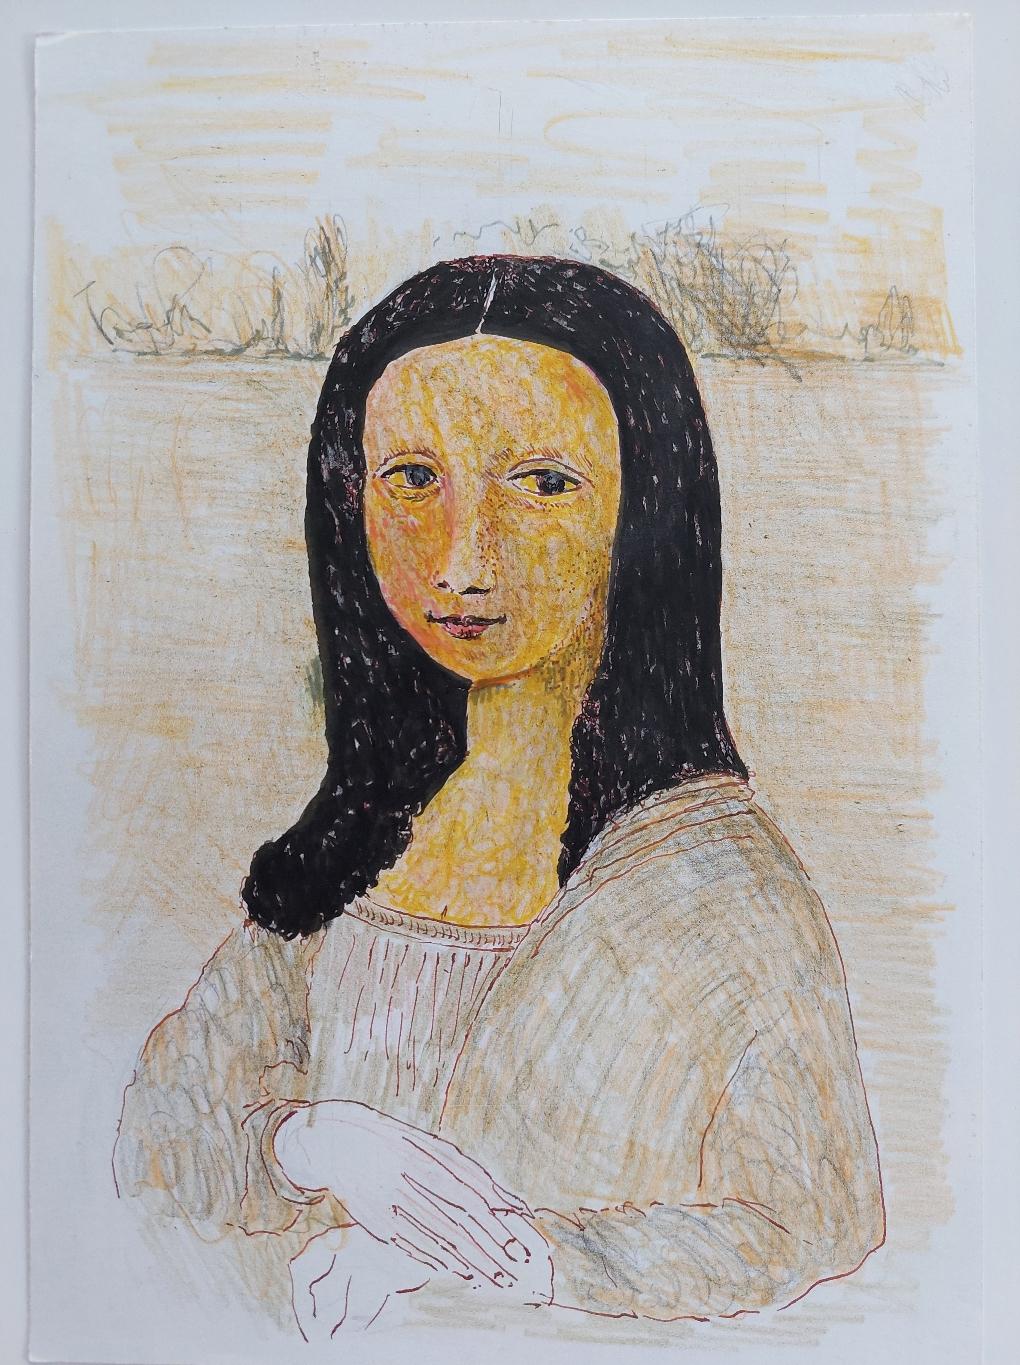 Sepia ink and mixed media portrait, the artist's take on the Mona Lisa
by Bernard Labbe (French Mid-20th Century)
original sepia ink, pencil, gouache, watercolor on paper
image size: 11.75 x 8.25 inches
unsigned , stamped verso
condition: very